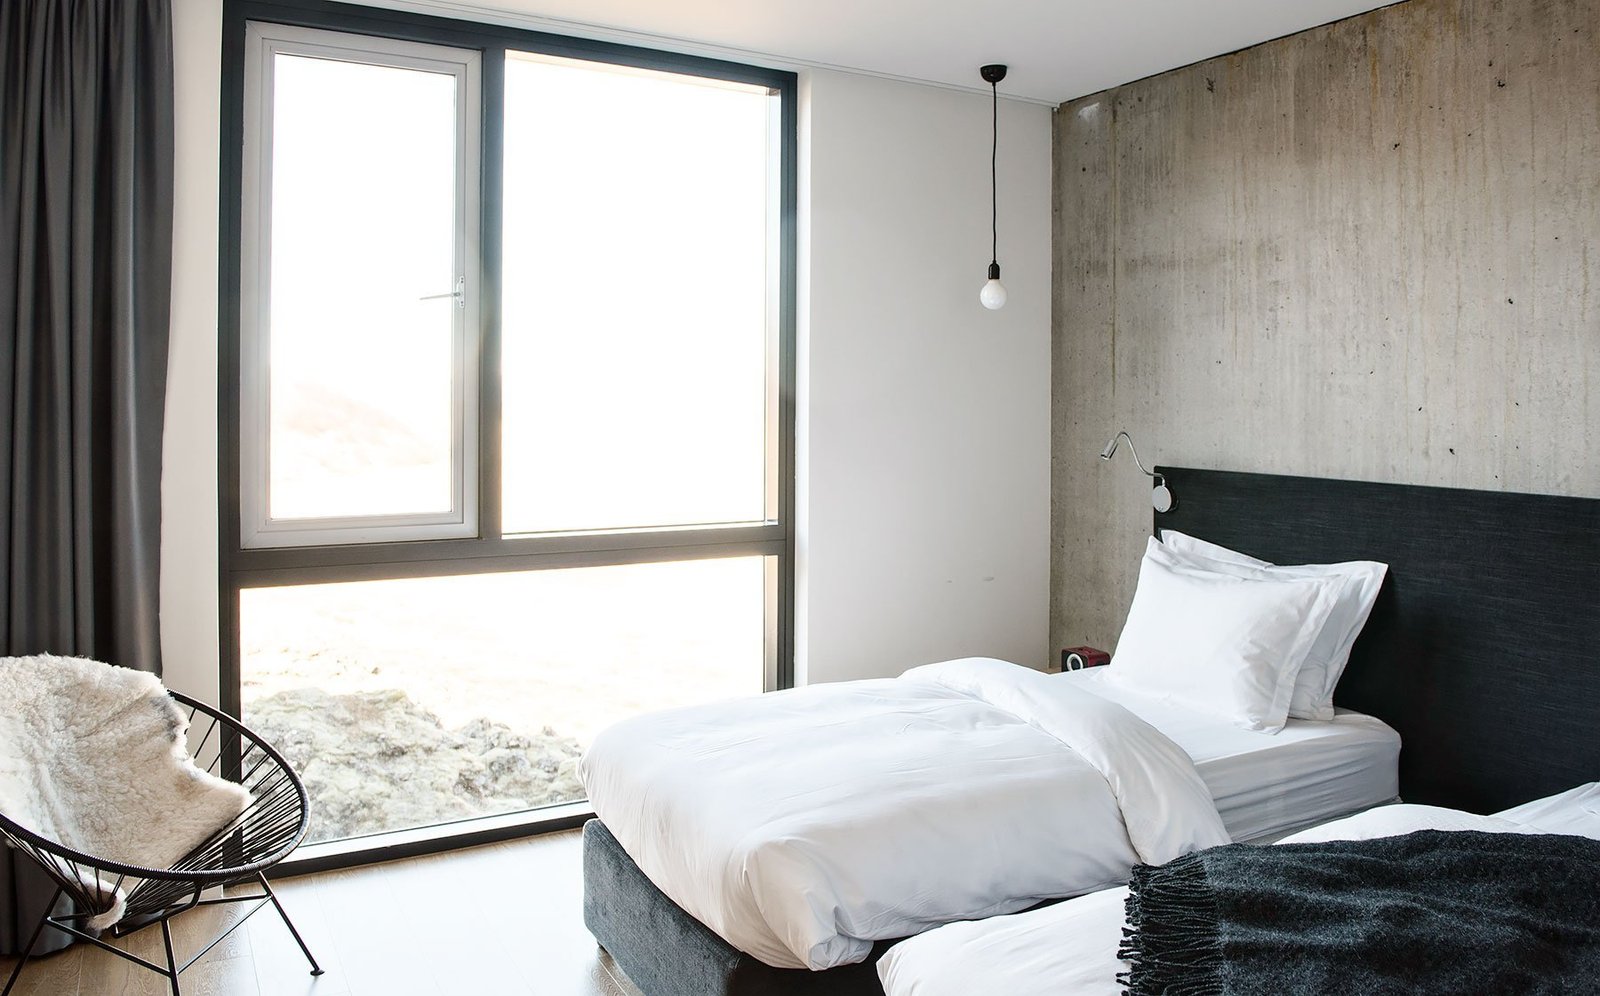 Where to stay in Iceland: ION Hotel, a luxury design hotel near the Golden Circle.